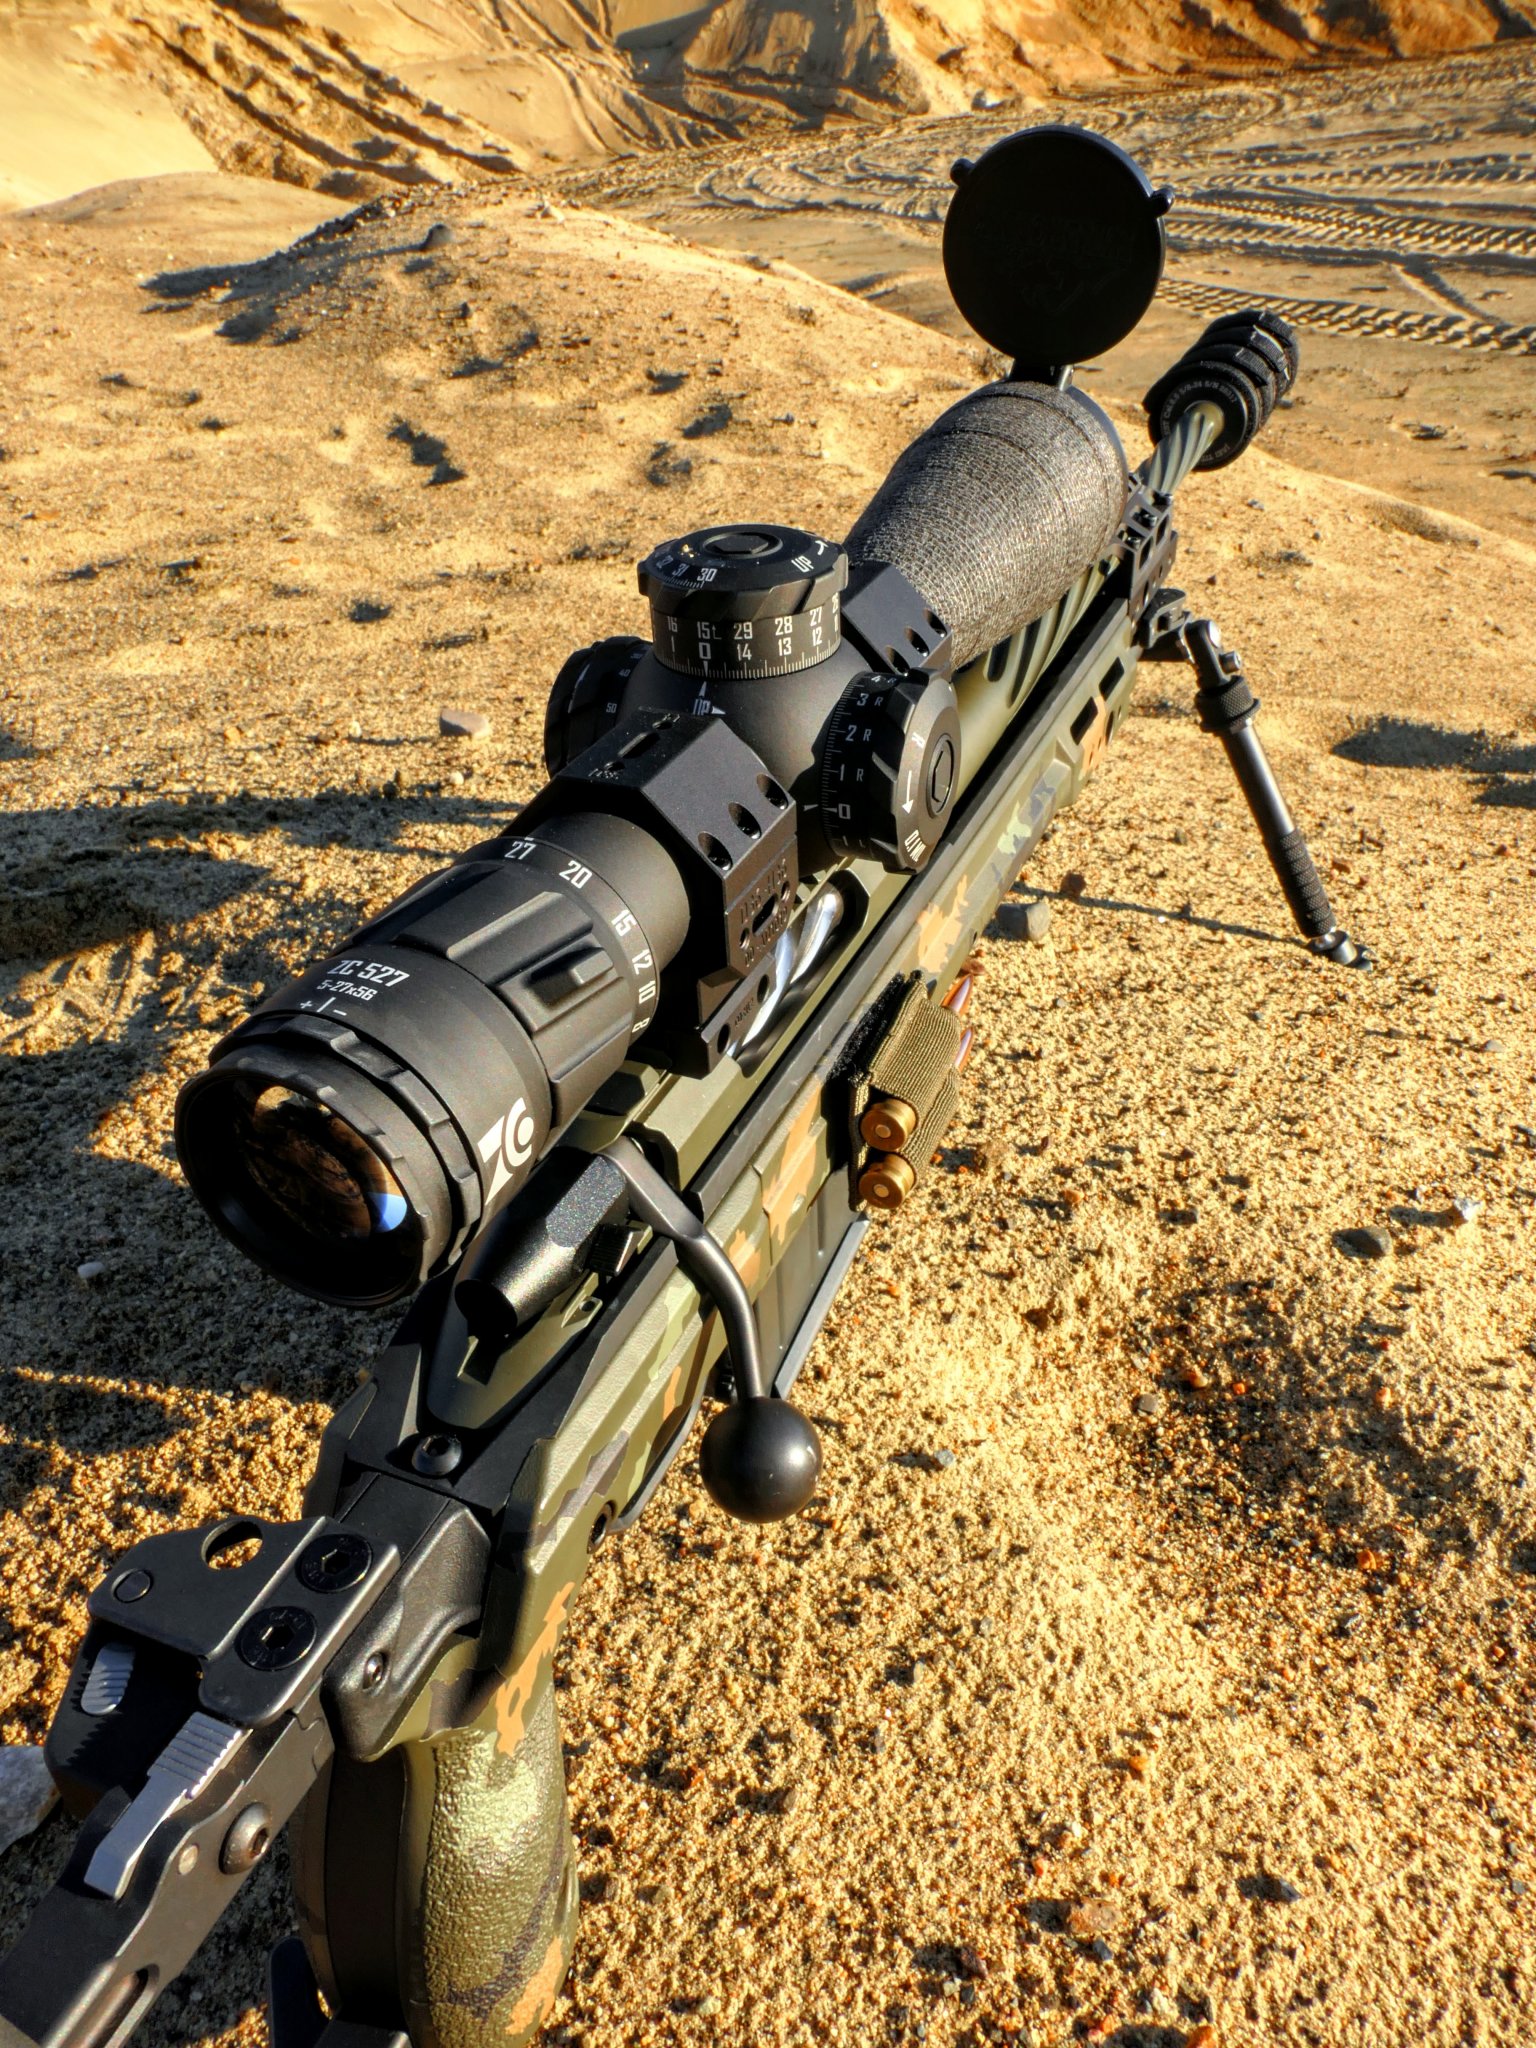 Rifle Scopes - Official Zero Compromise Optic News & Updates 